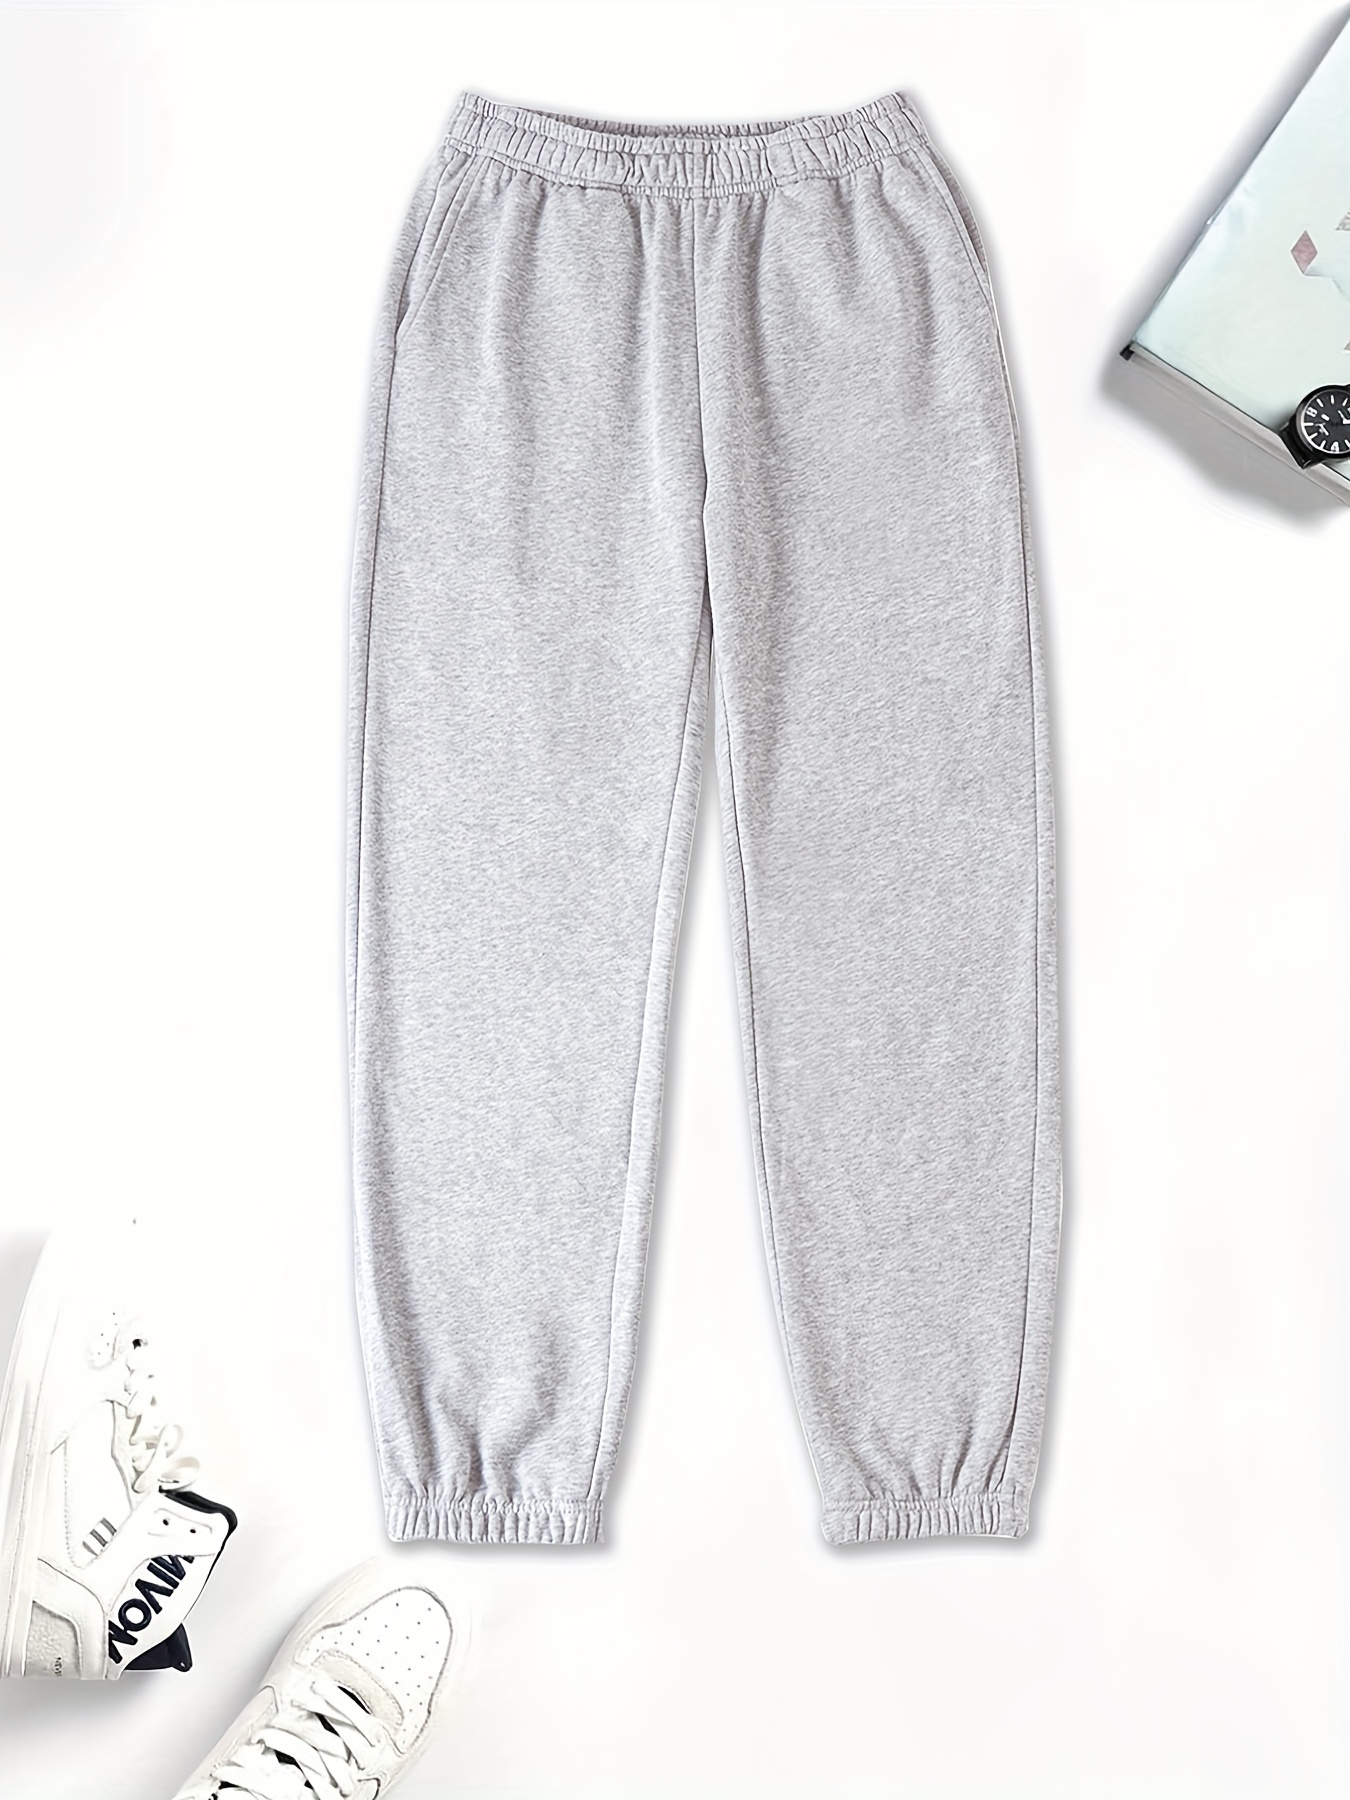 Basic Plain Sweatpants For Girls High Waisted Workout Active Joggers Pants, Relaxed Fit & Street Style